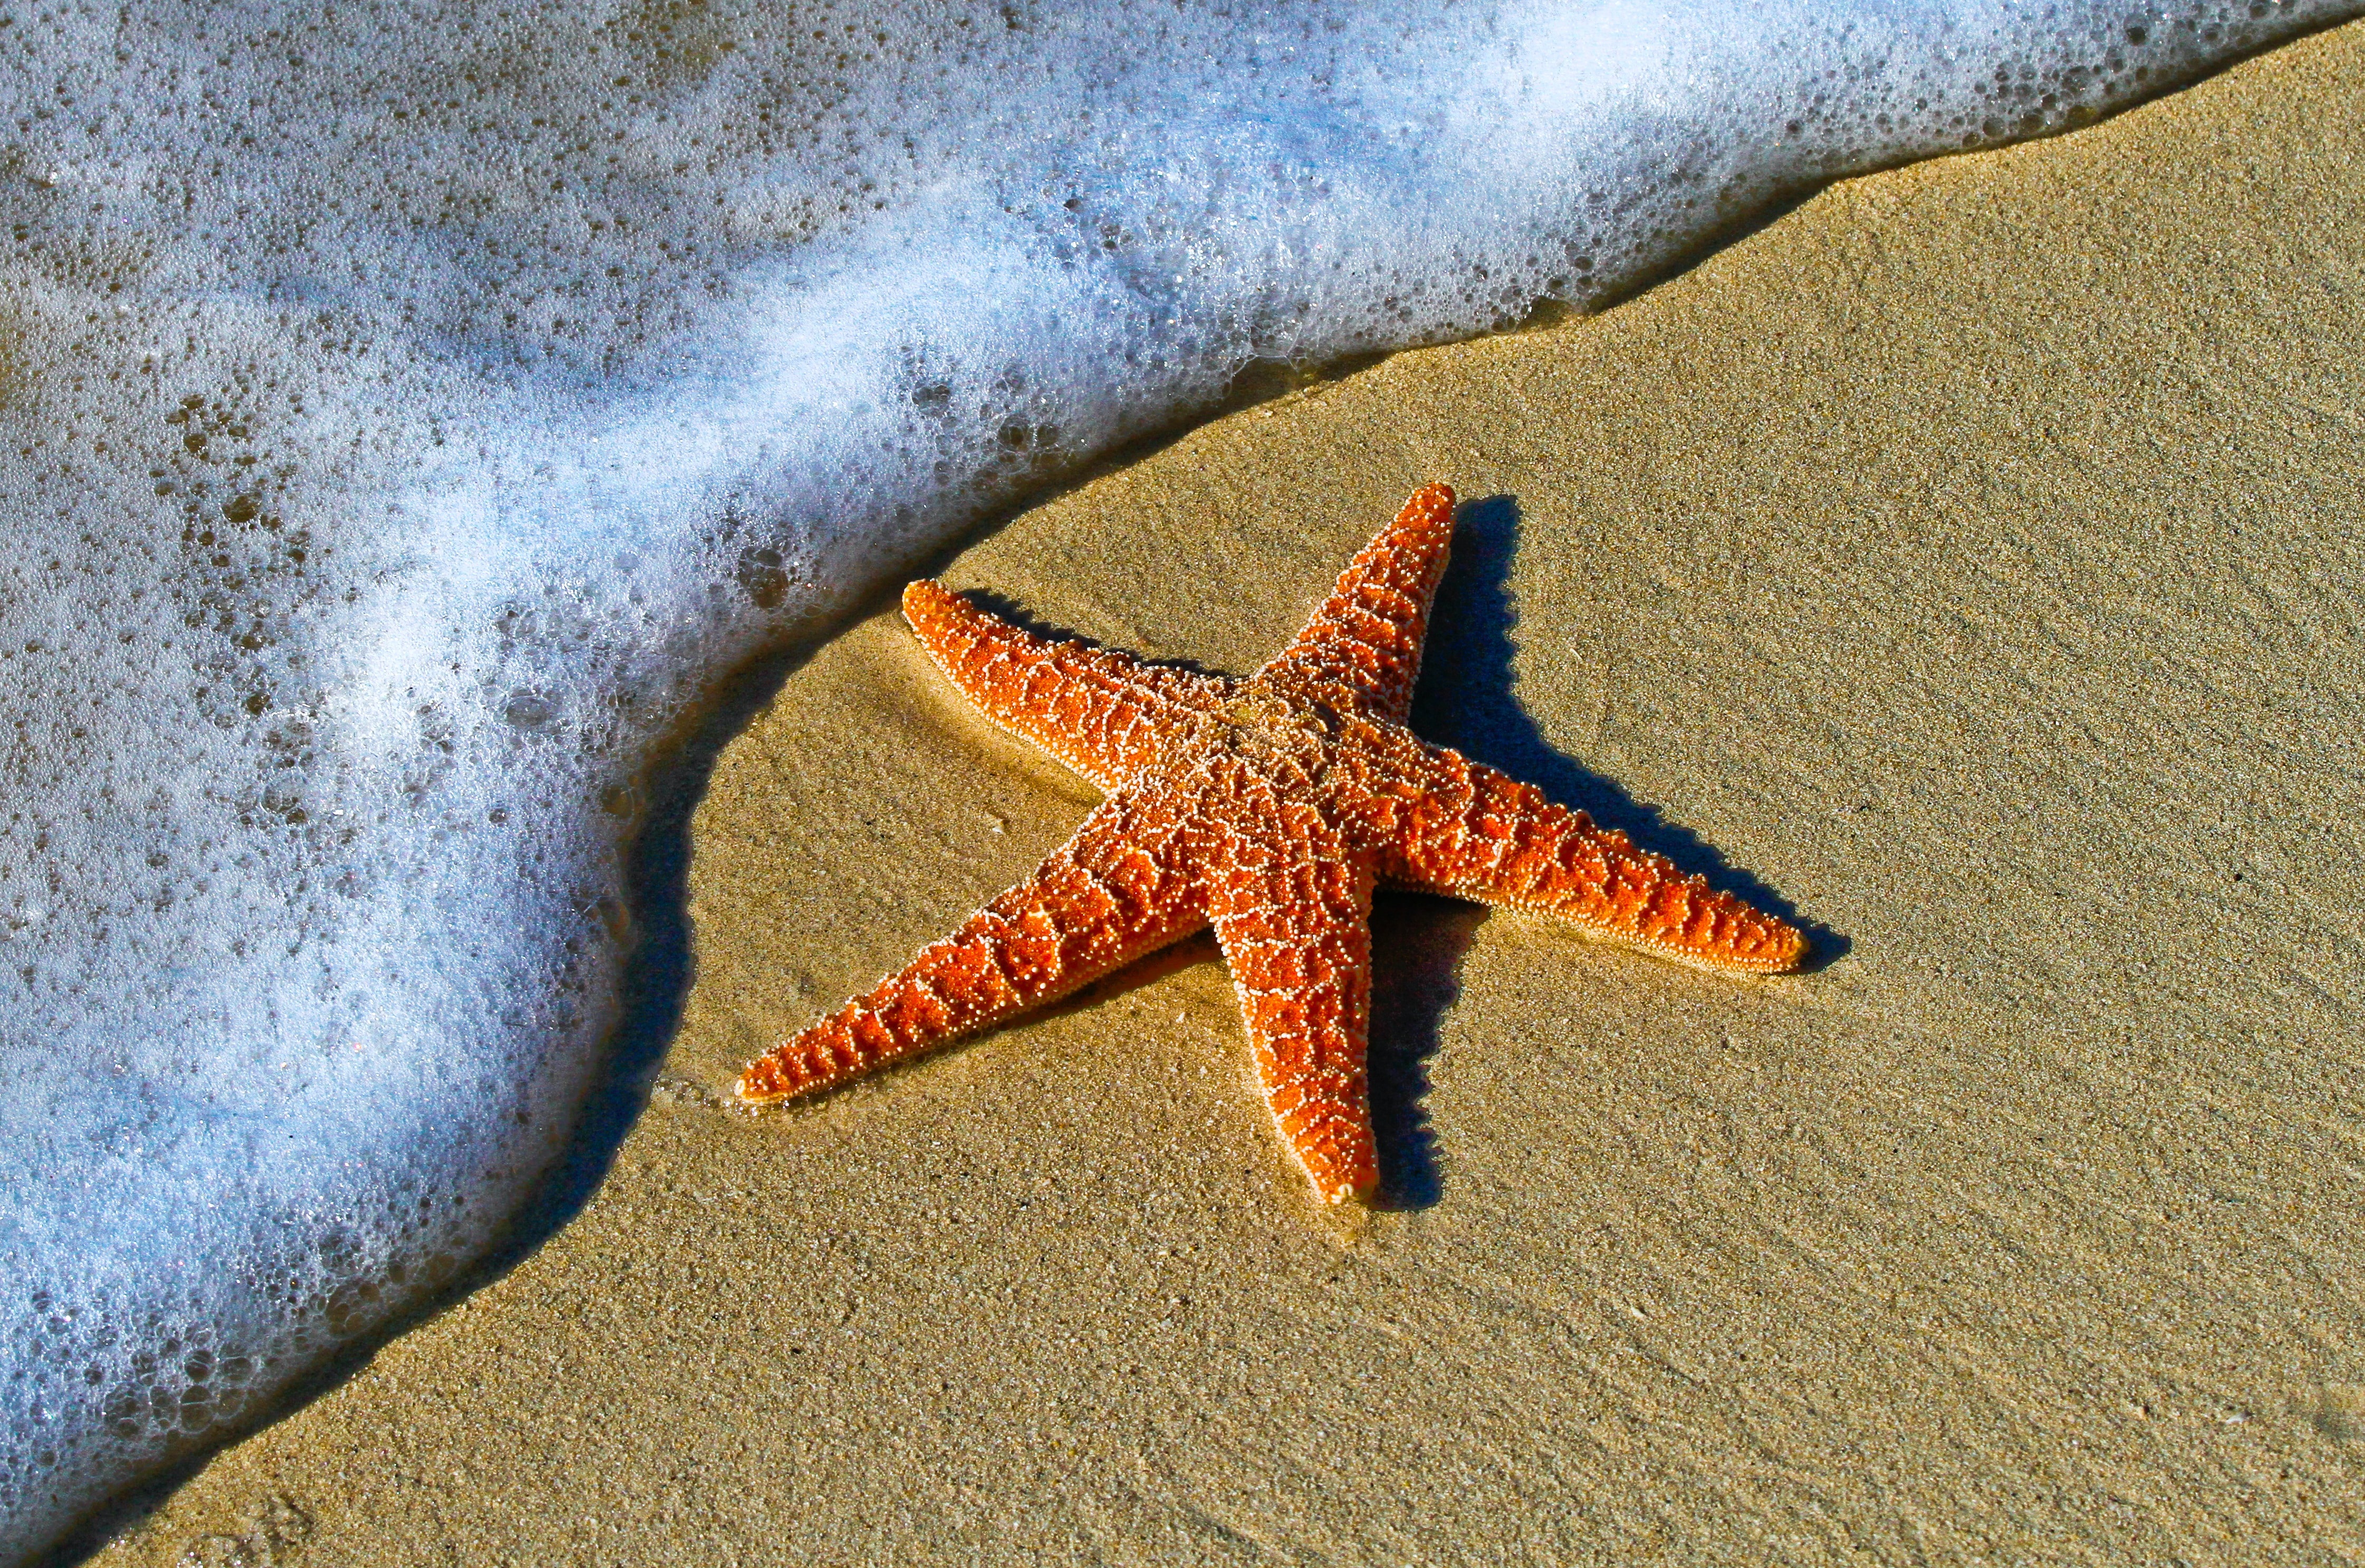 A starfish washed up on a beach